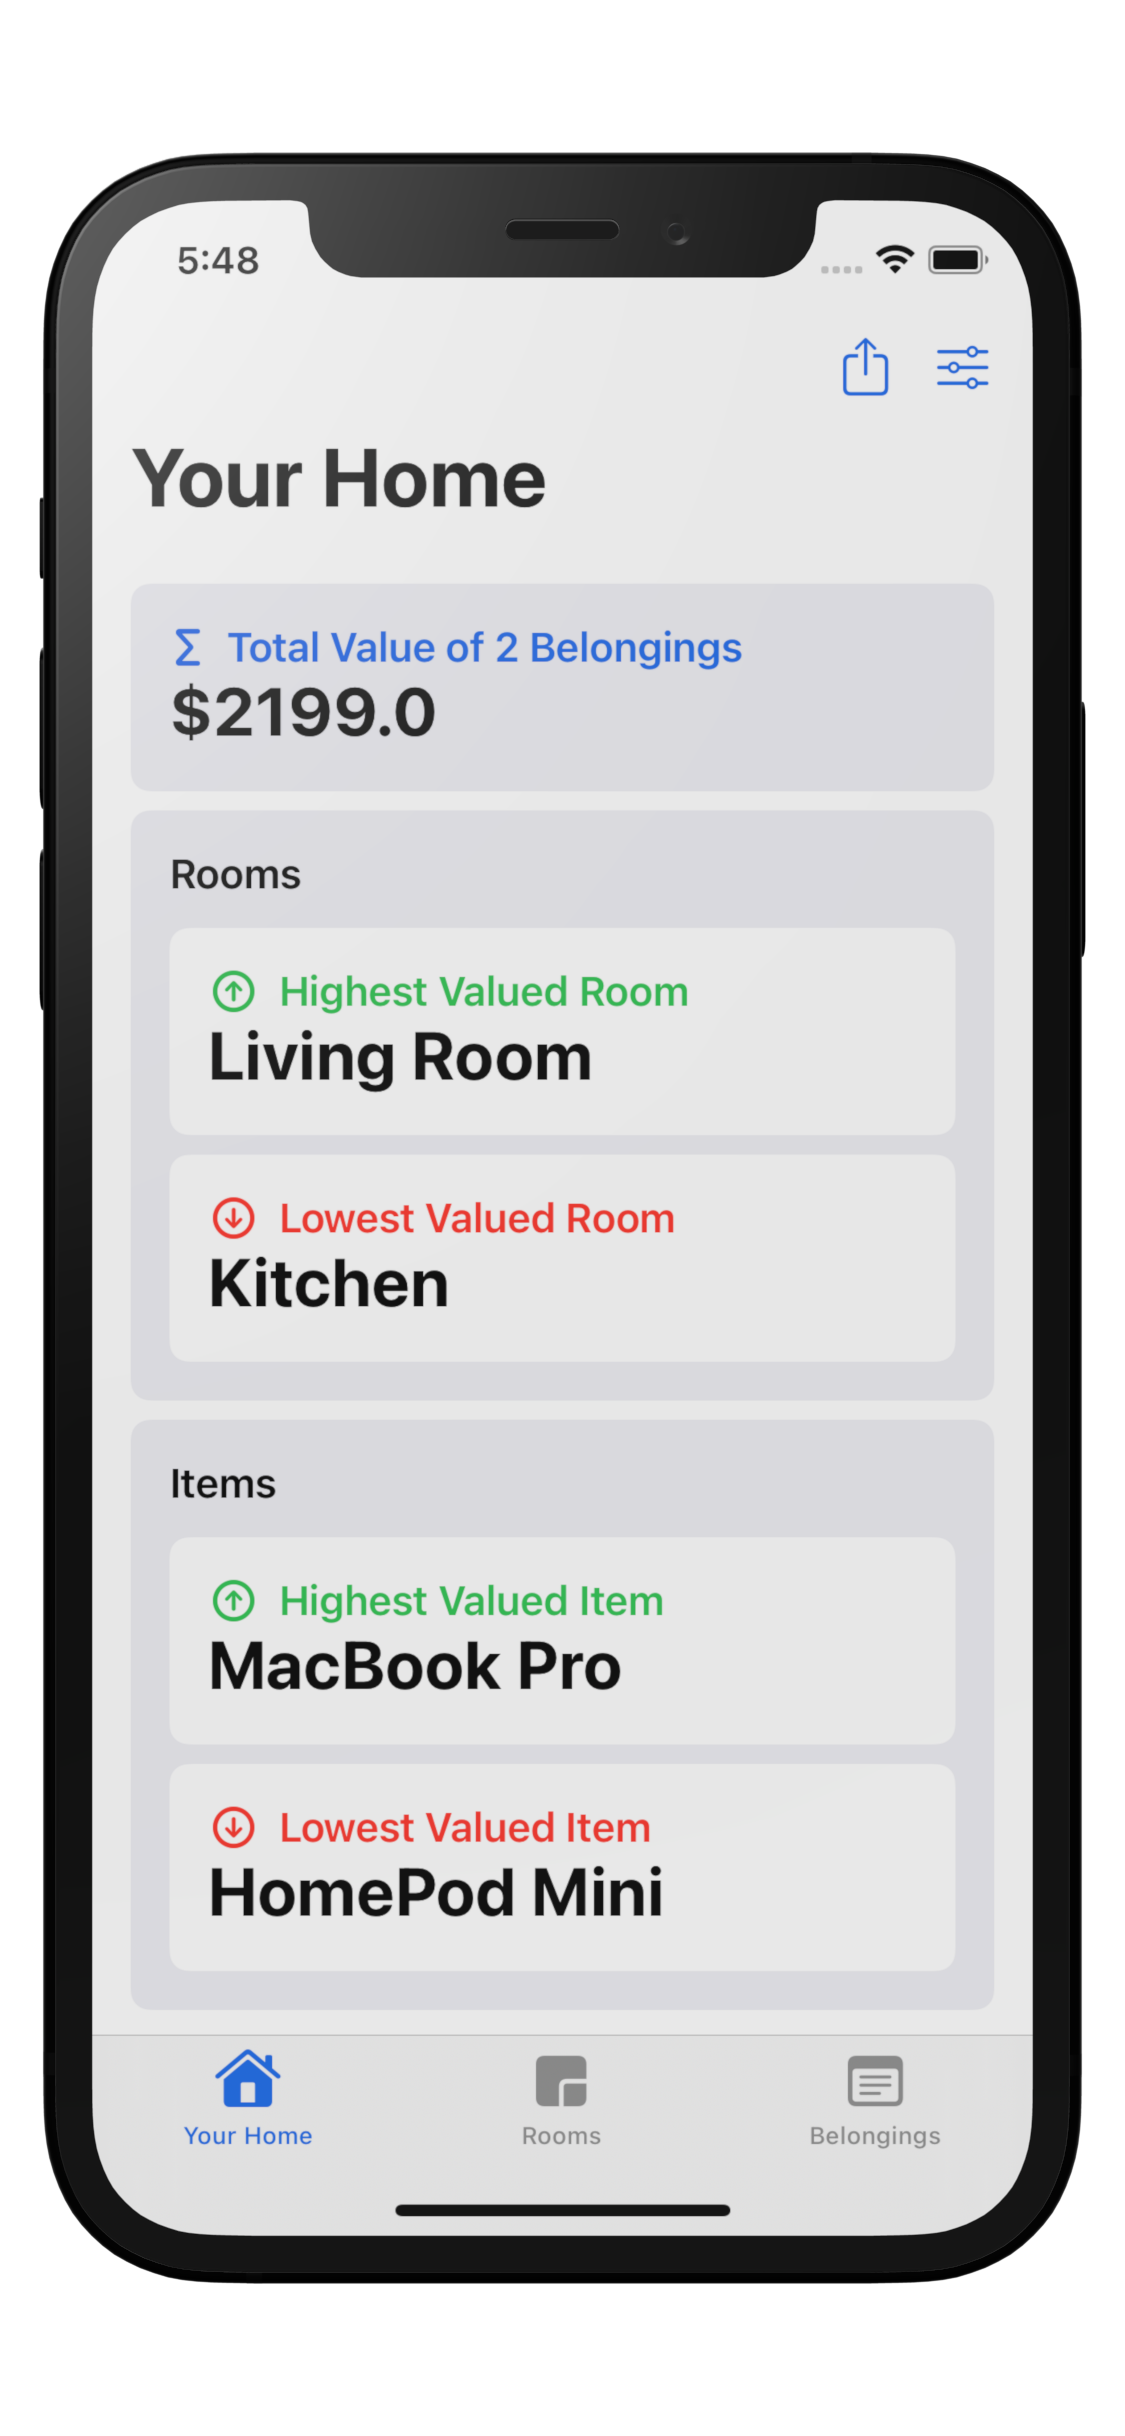 image of the home dashboard within the app